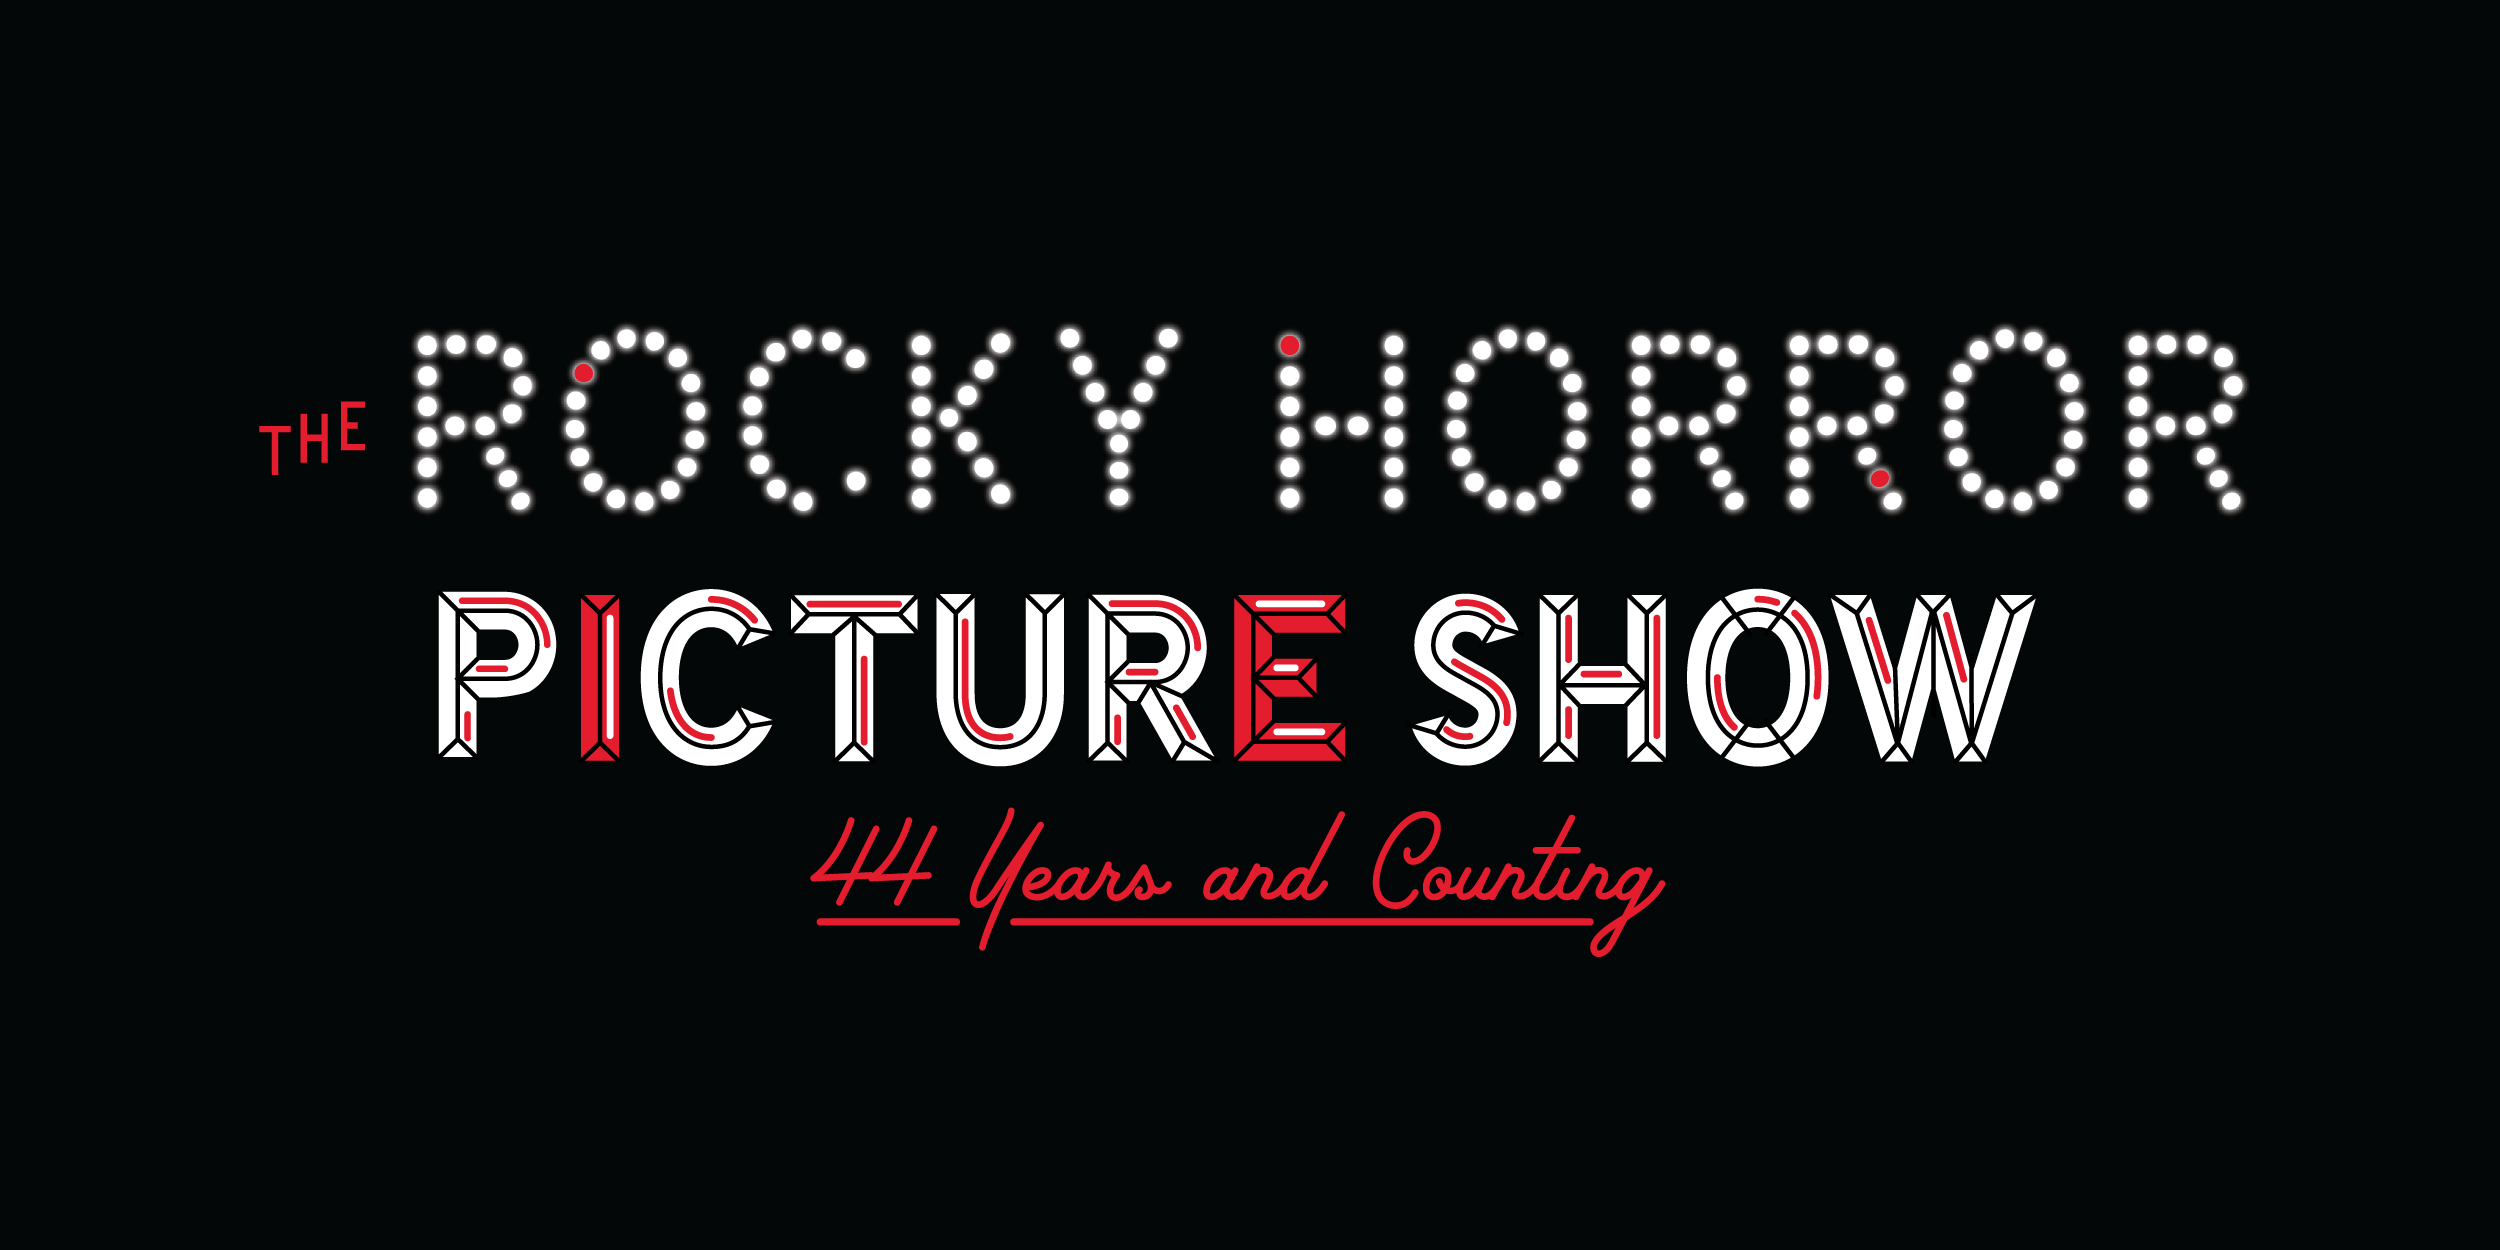 "The Rocky Horror Picture Show - 44 Years and Counting" in custom lettering